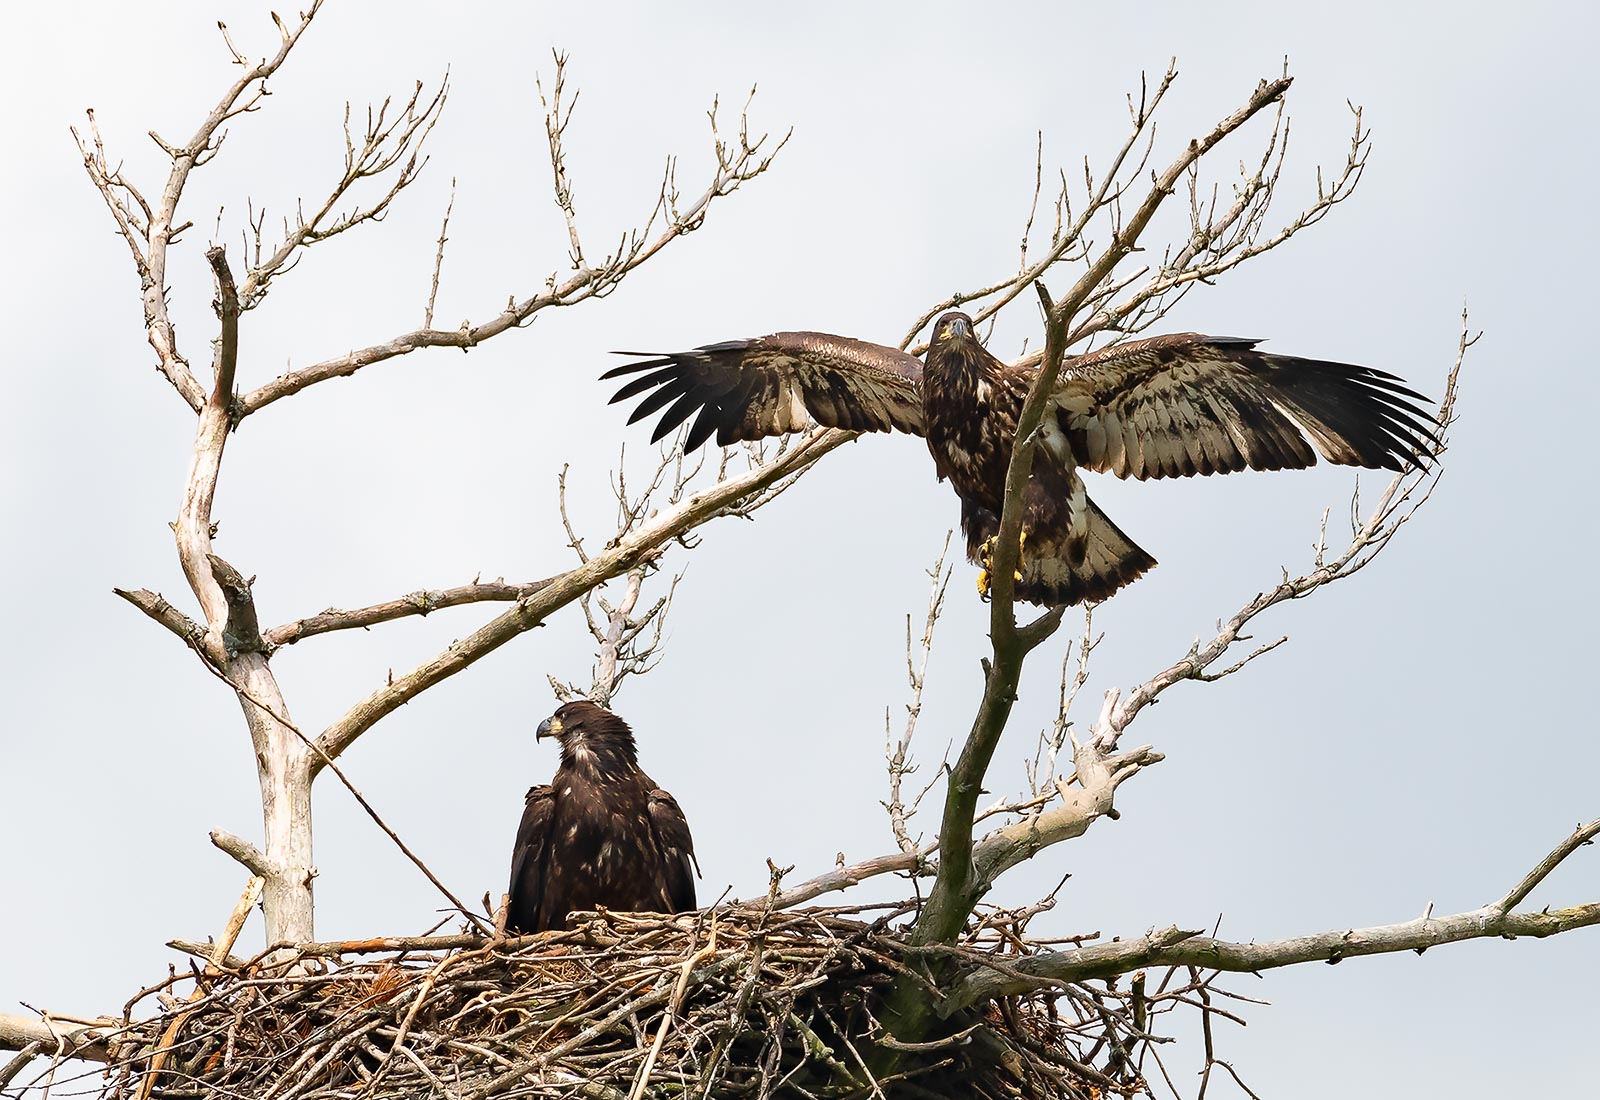 Eaglet spreads its while while branching